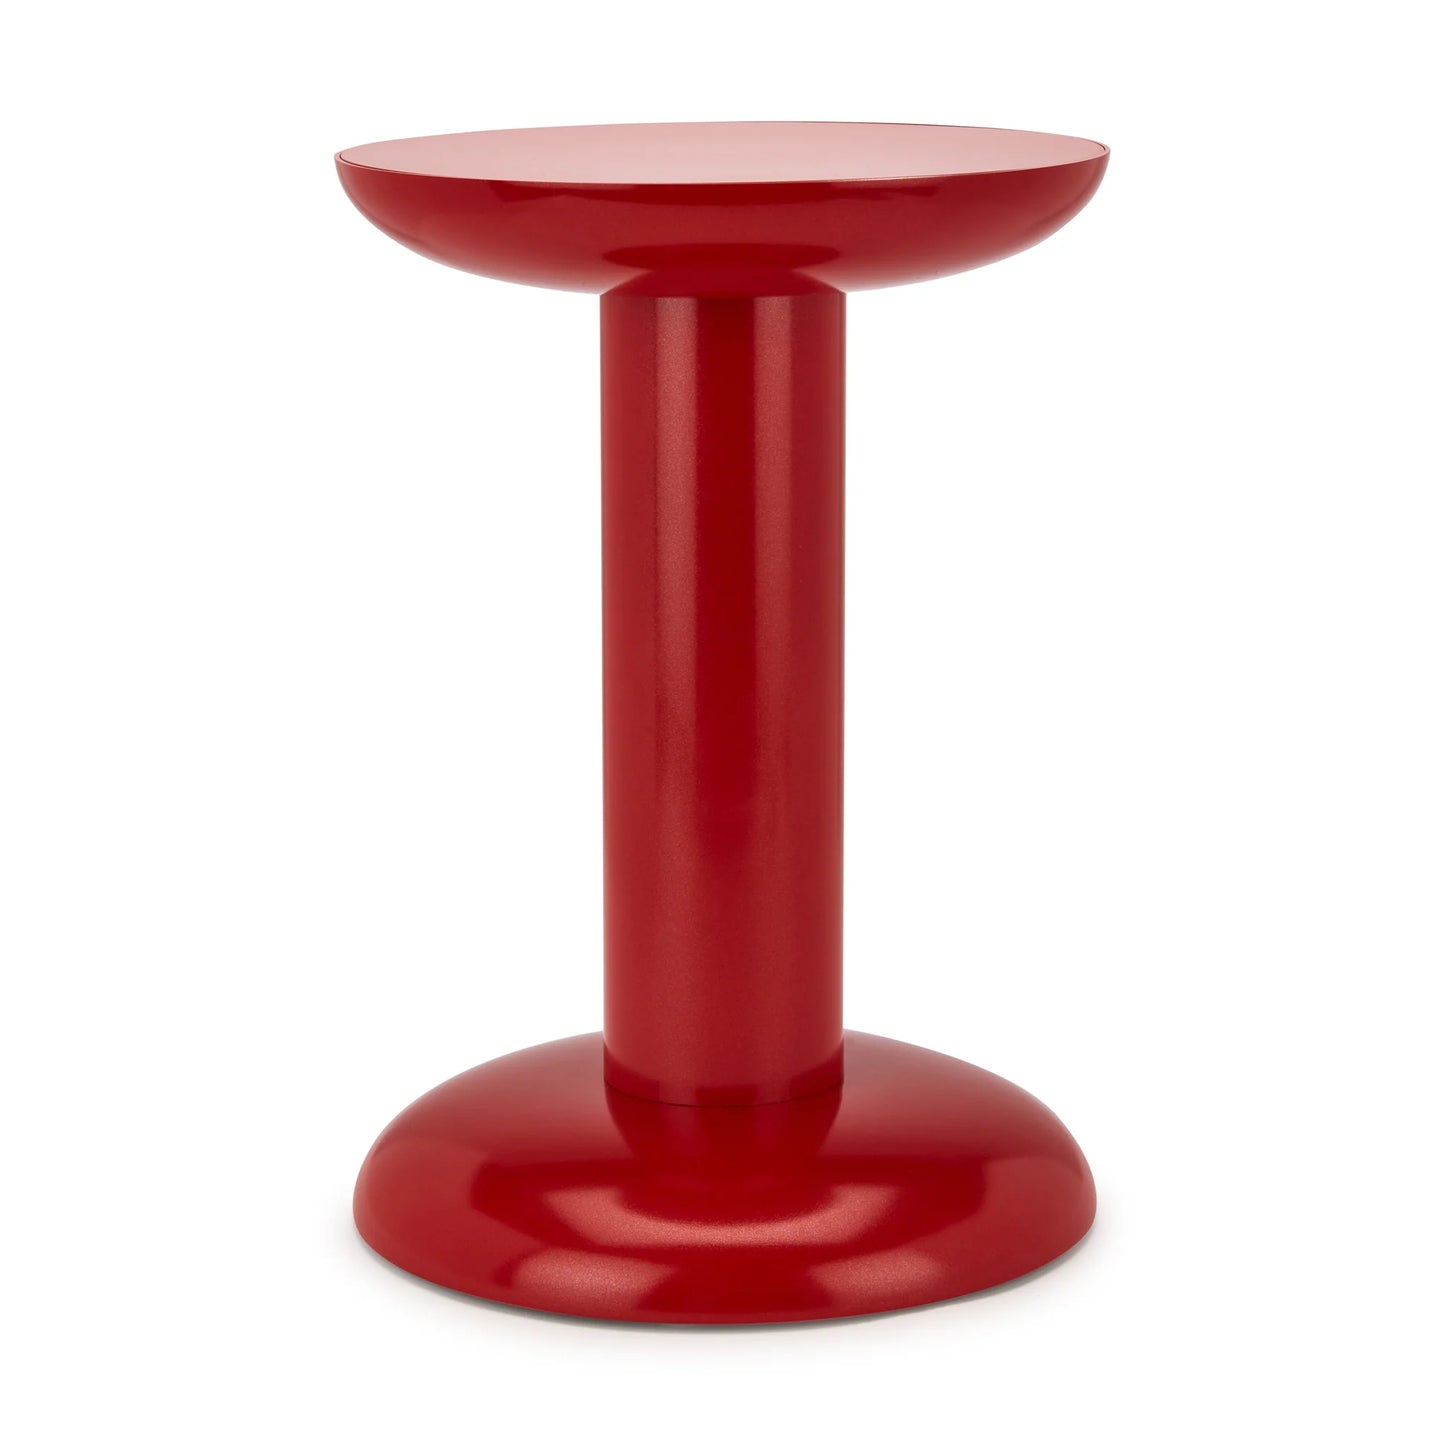 Raawii Recycled Aluminum Thing Stool by George Sowden - Carmine Red